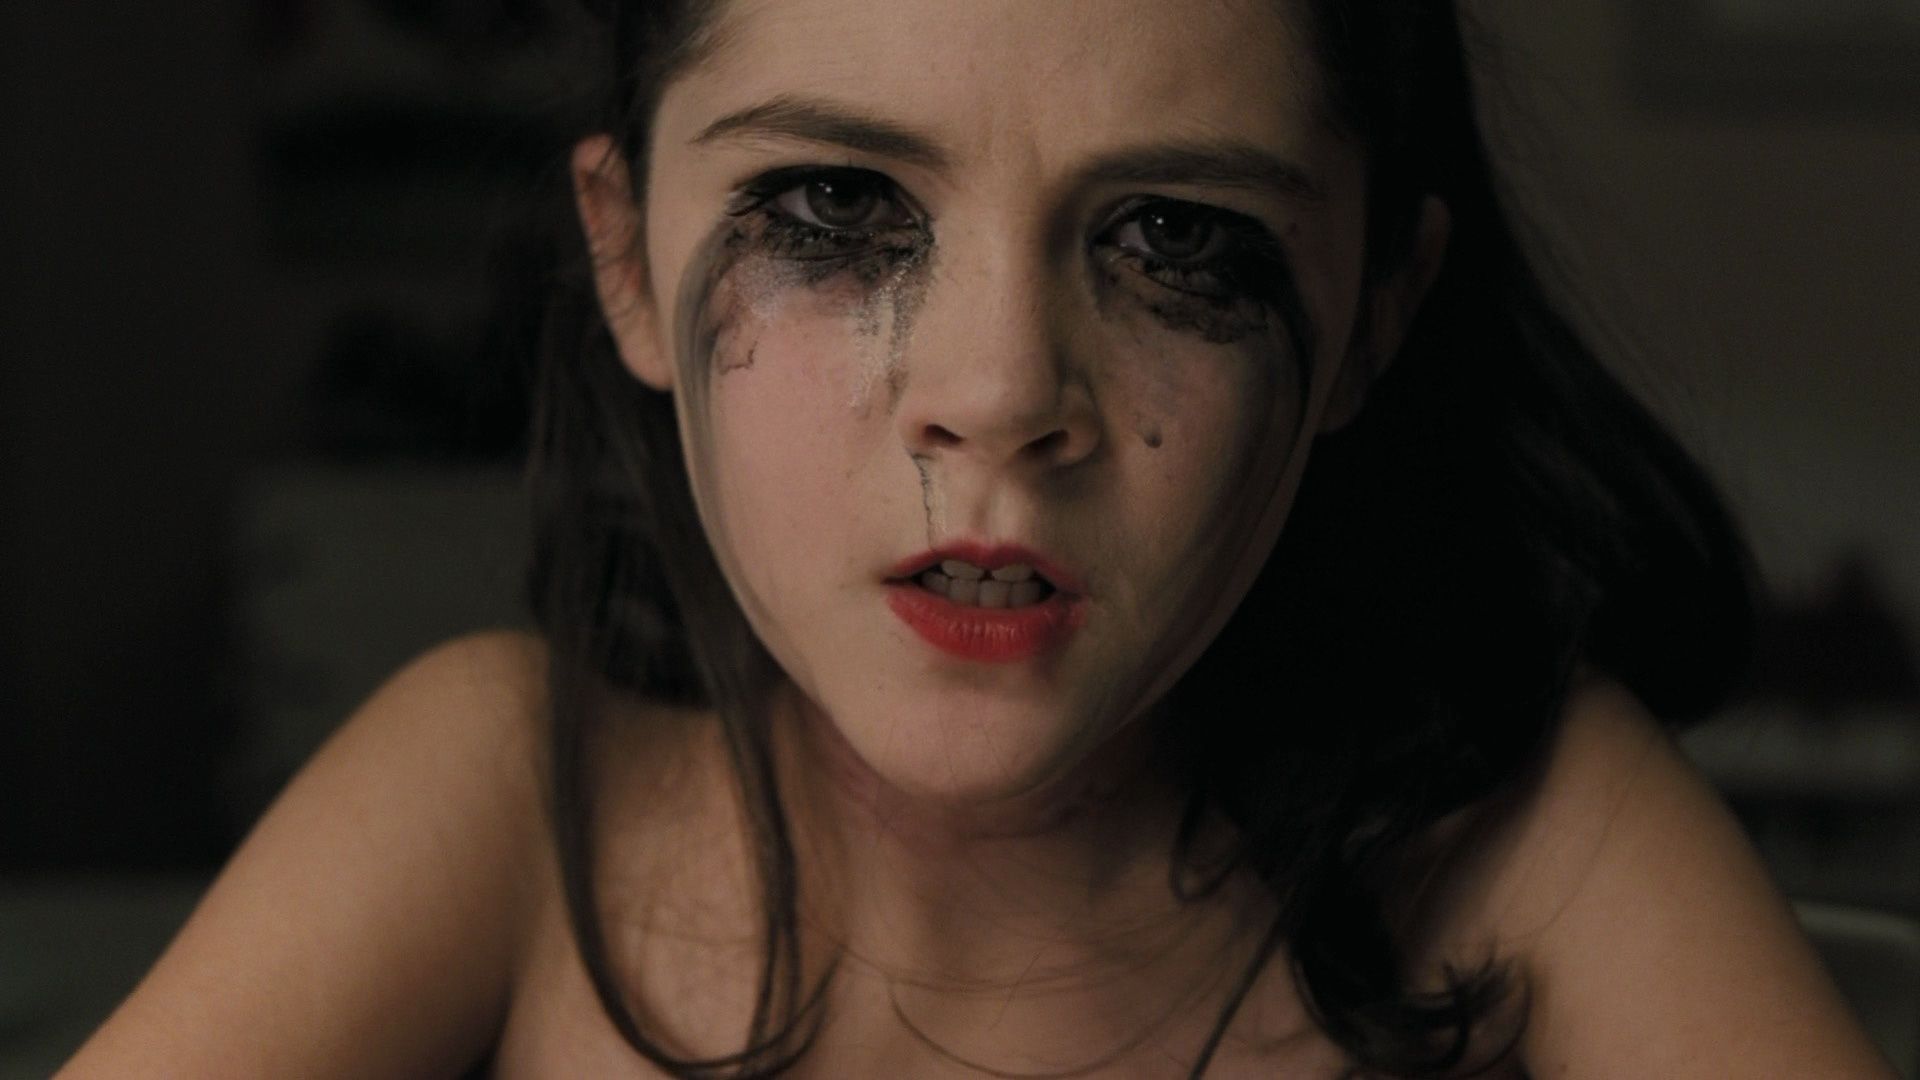 keep young (movie: the orphan). Horror movies scariest